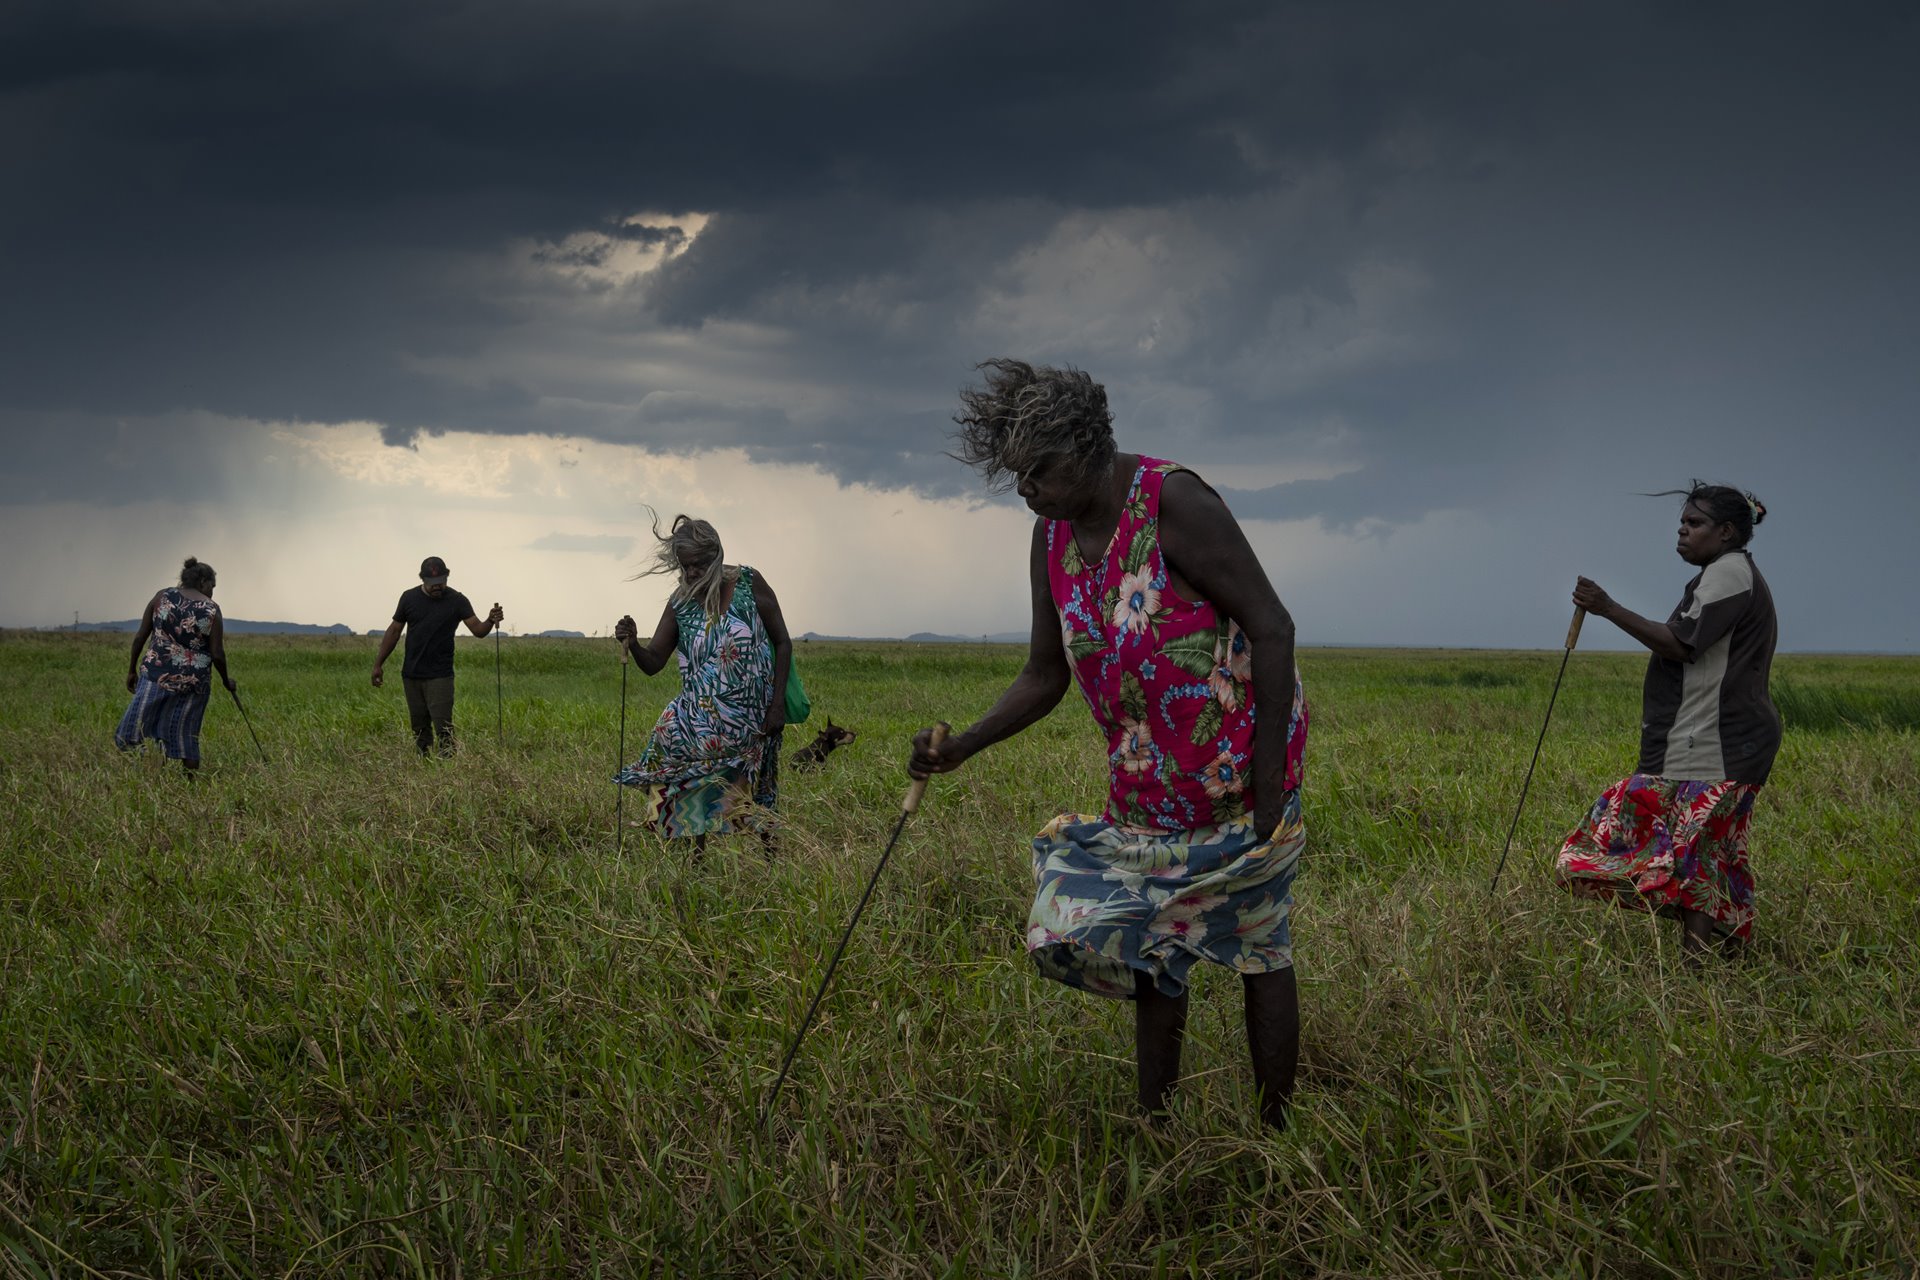 <p>A group of Narwarddeken women elders hunt for turtles with homemade tools on floodplains near Gunbalanya, Arnhem Land, Australia. They spent all day finding just two turtles, which are a popular delicacy. Soon the grass will be burnt to make the hunt easier.</p>
